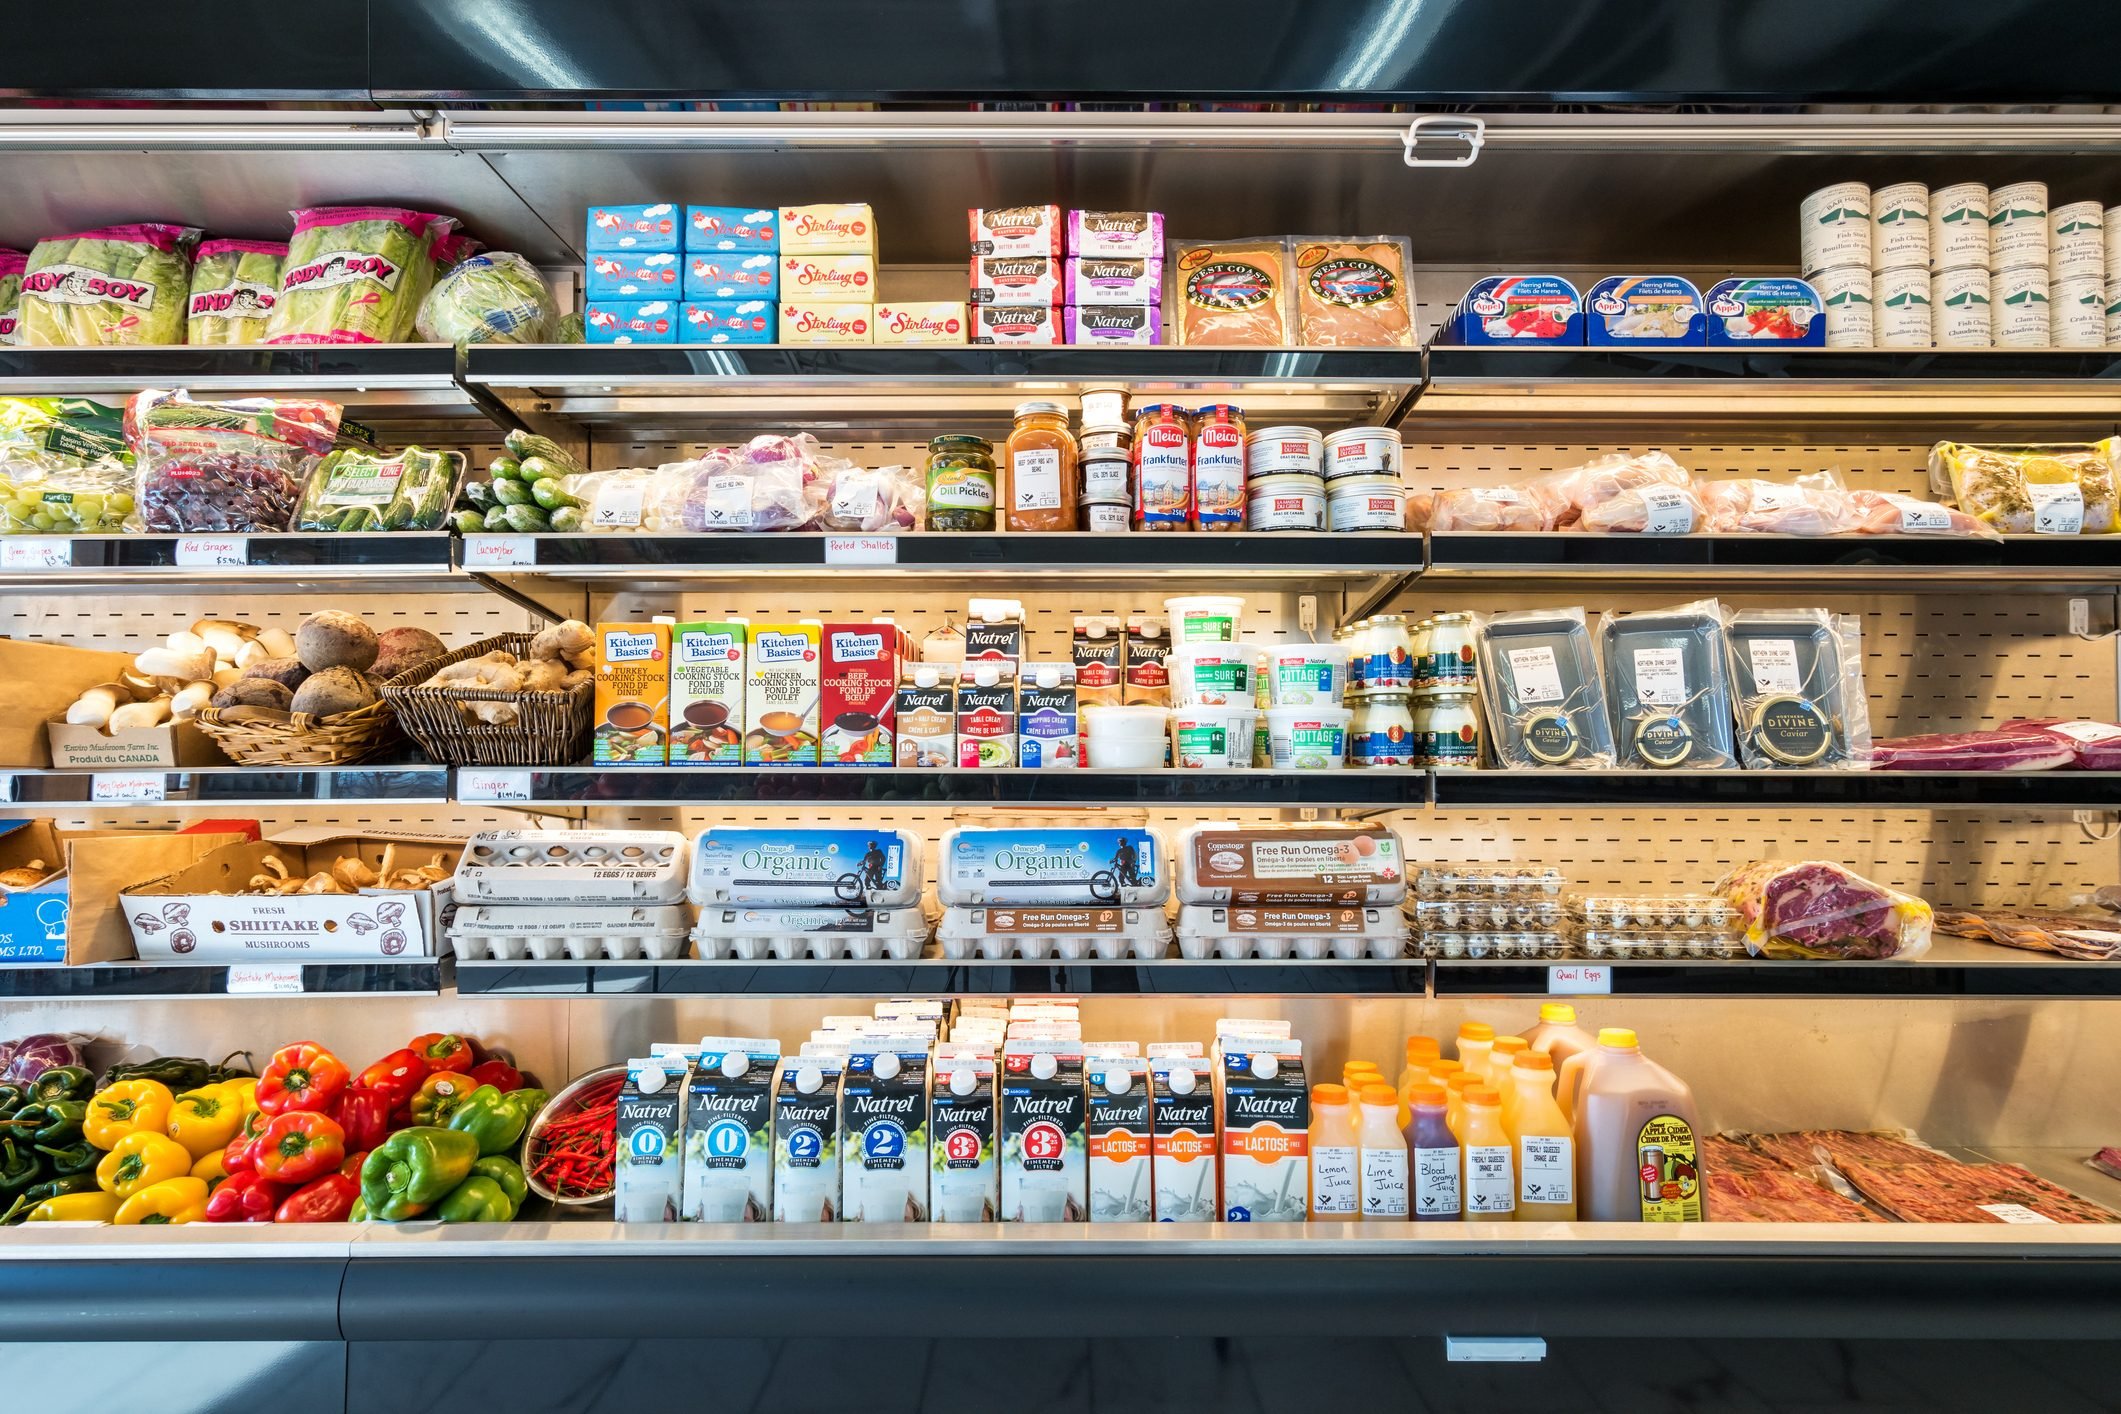 Refrigerator shelves in a grocery delicatessen store